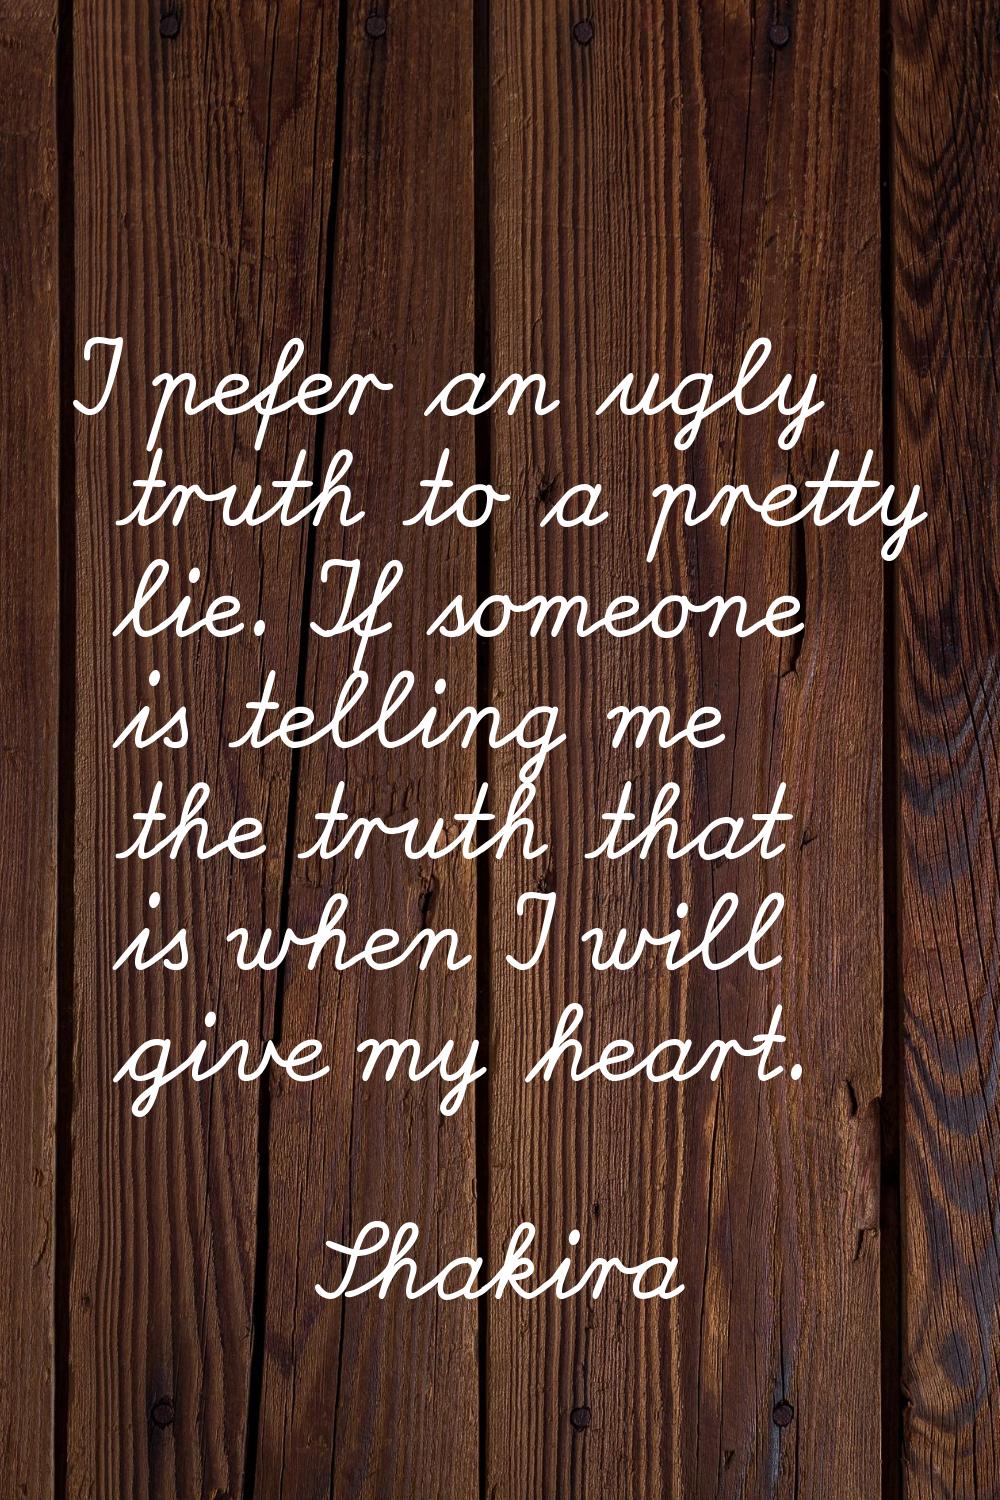 I pefer an ugly truth to a pretty lie. If someone is telling me the truth that is when I will give 